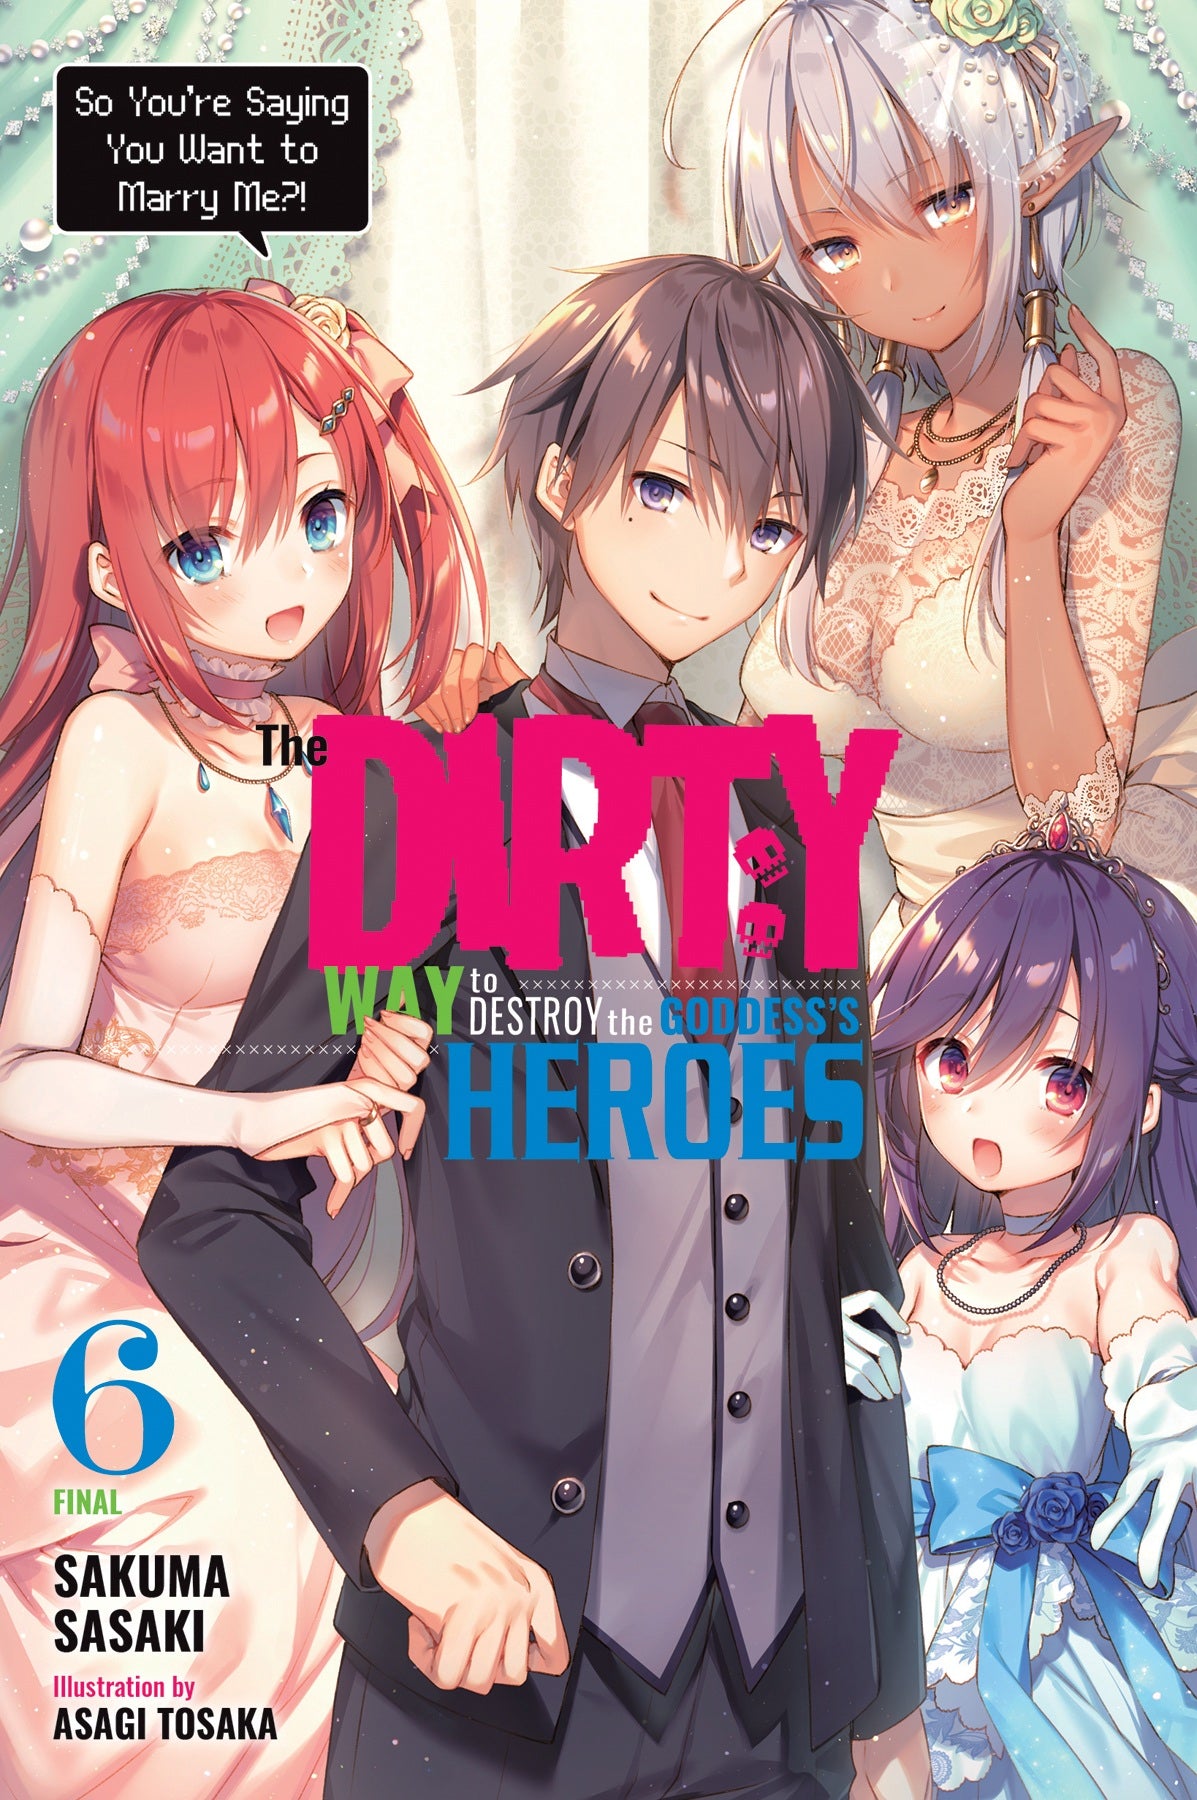 The Dirty Way to Destroy the Goddess's Heroes Vol. 06 (Light Novel): So You're Saying You Want to Marry Me?!